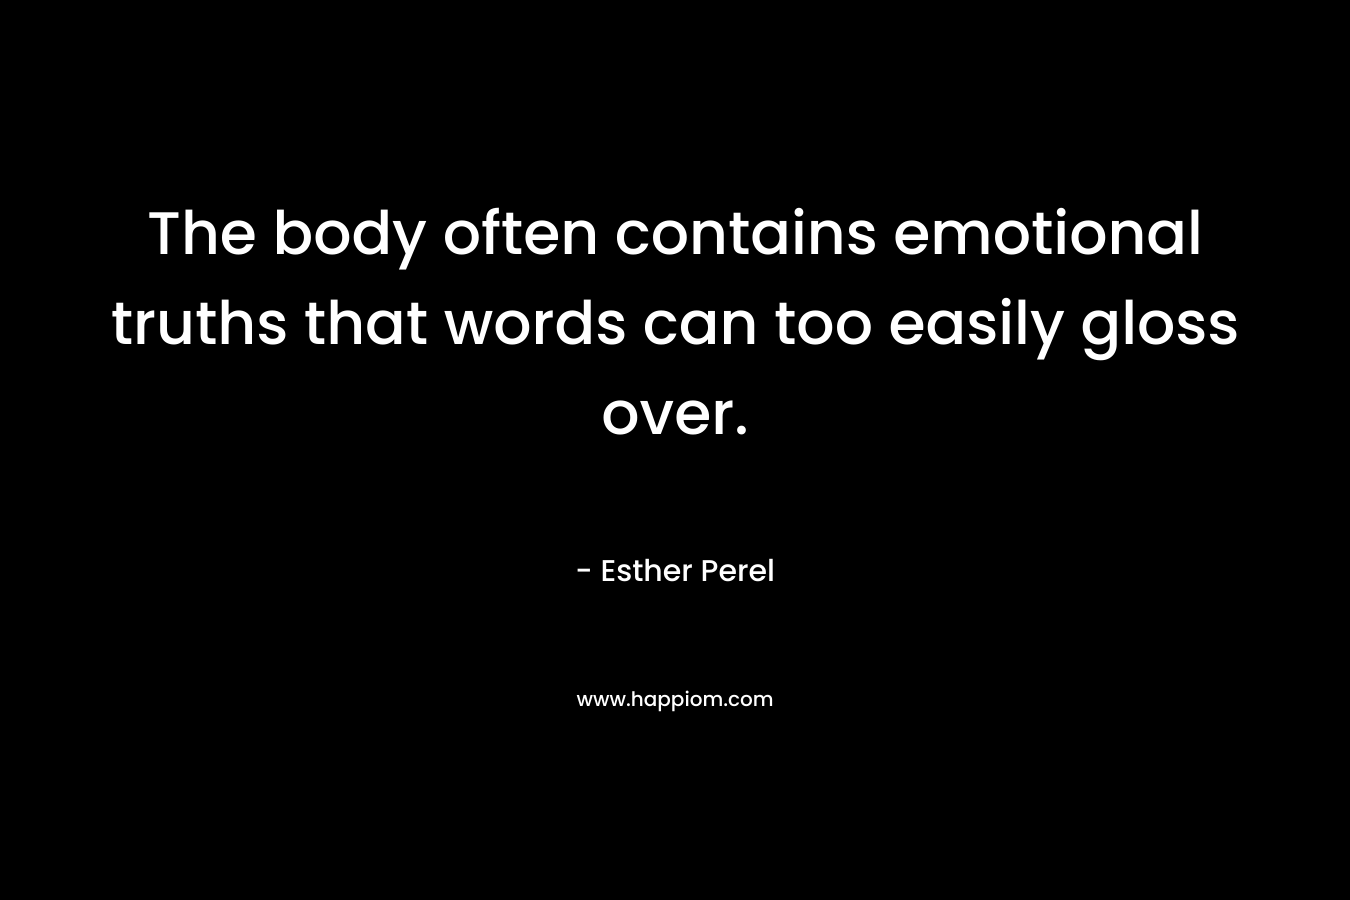 The body often contains emotional truths that words can too easily gloss over. – Esther Perel